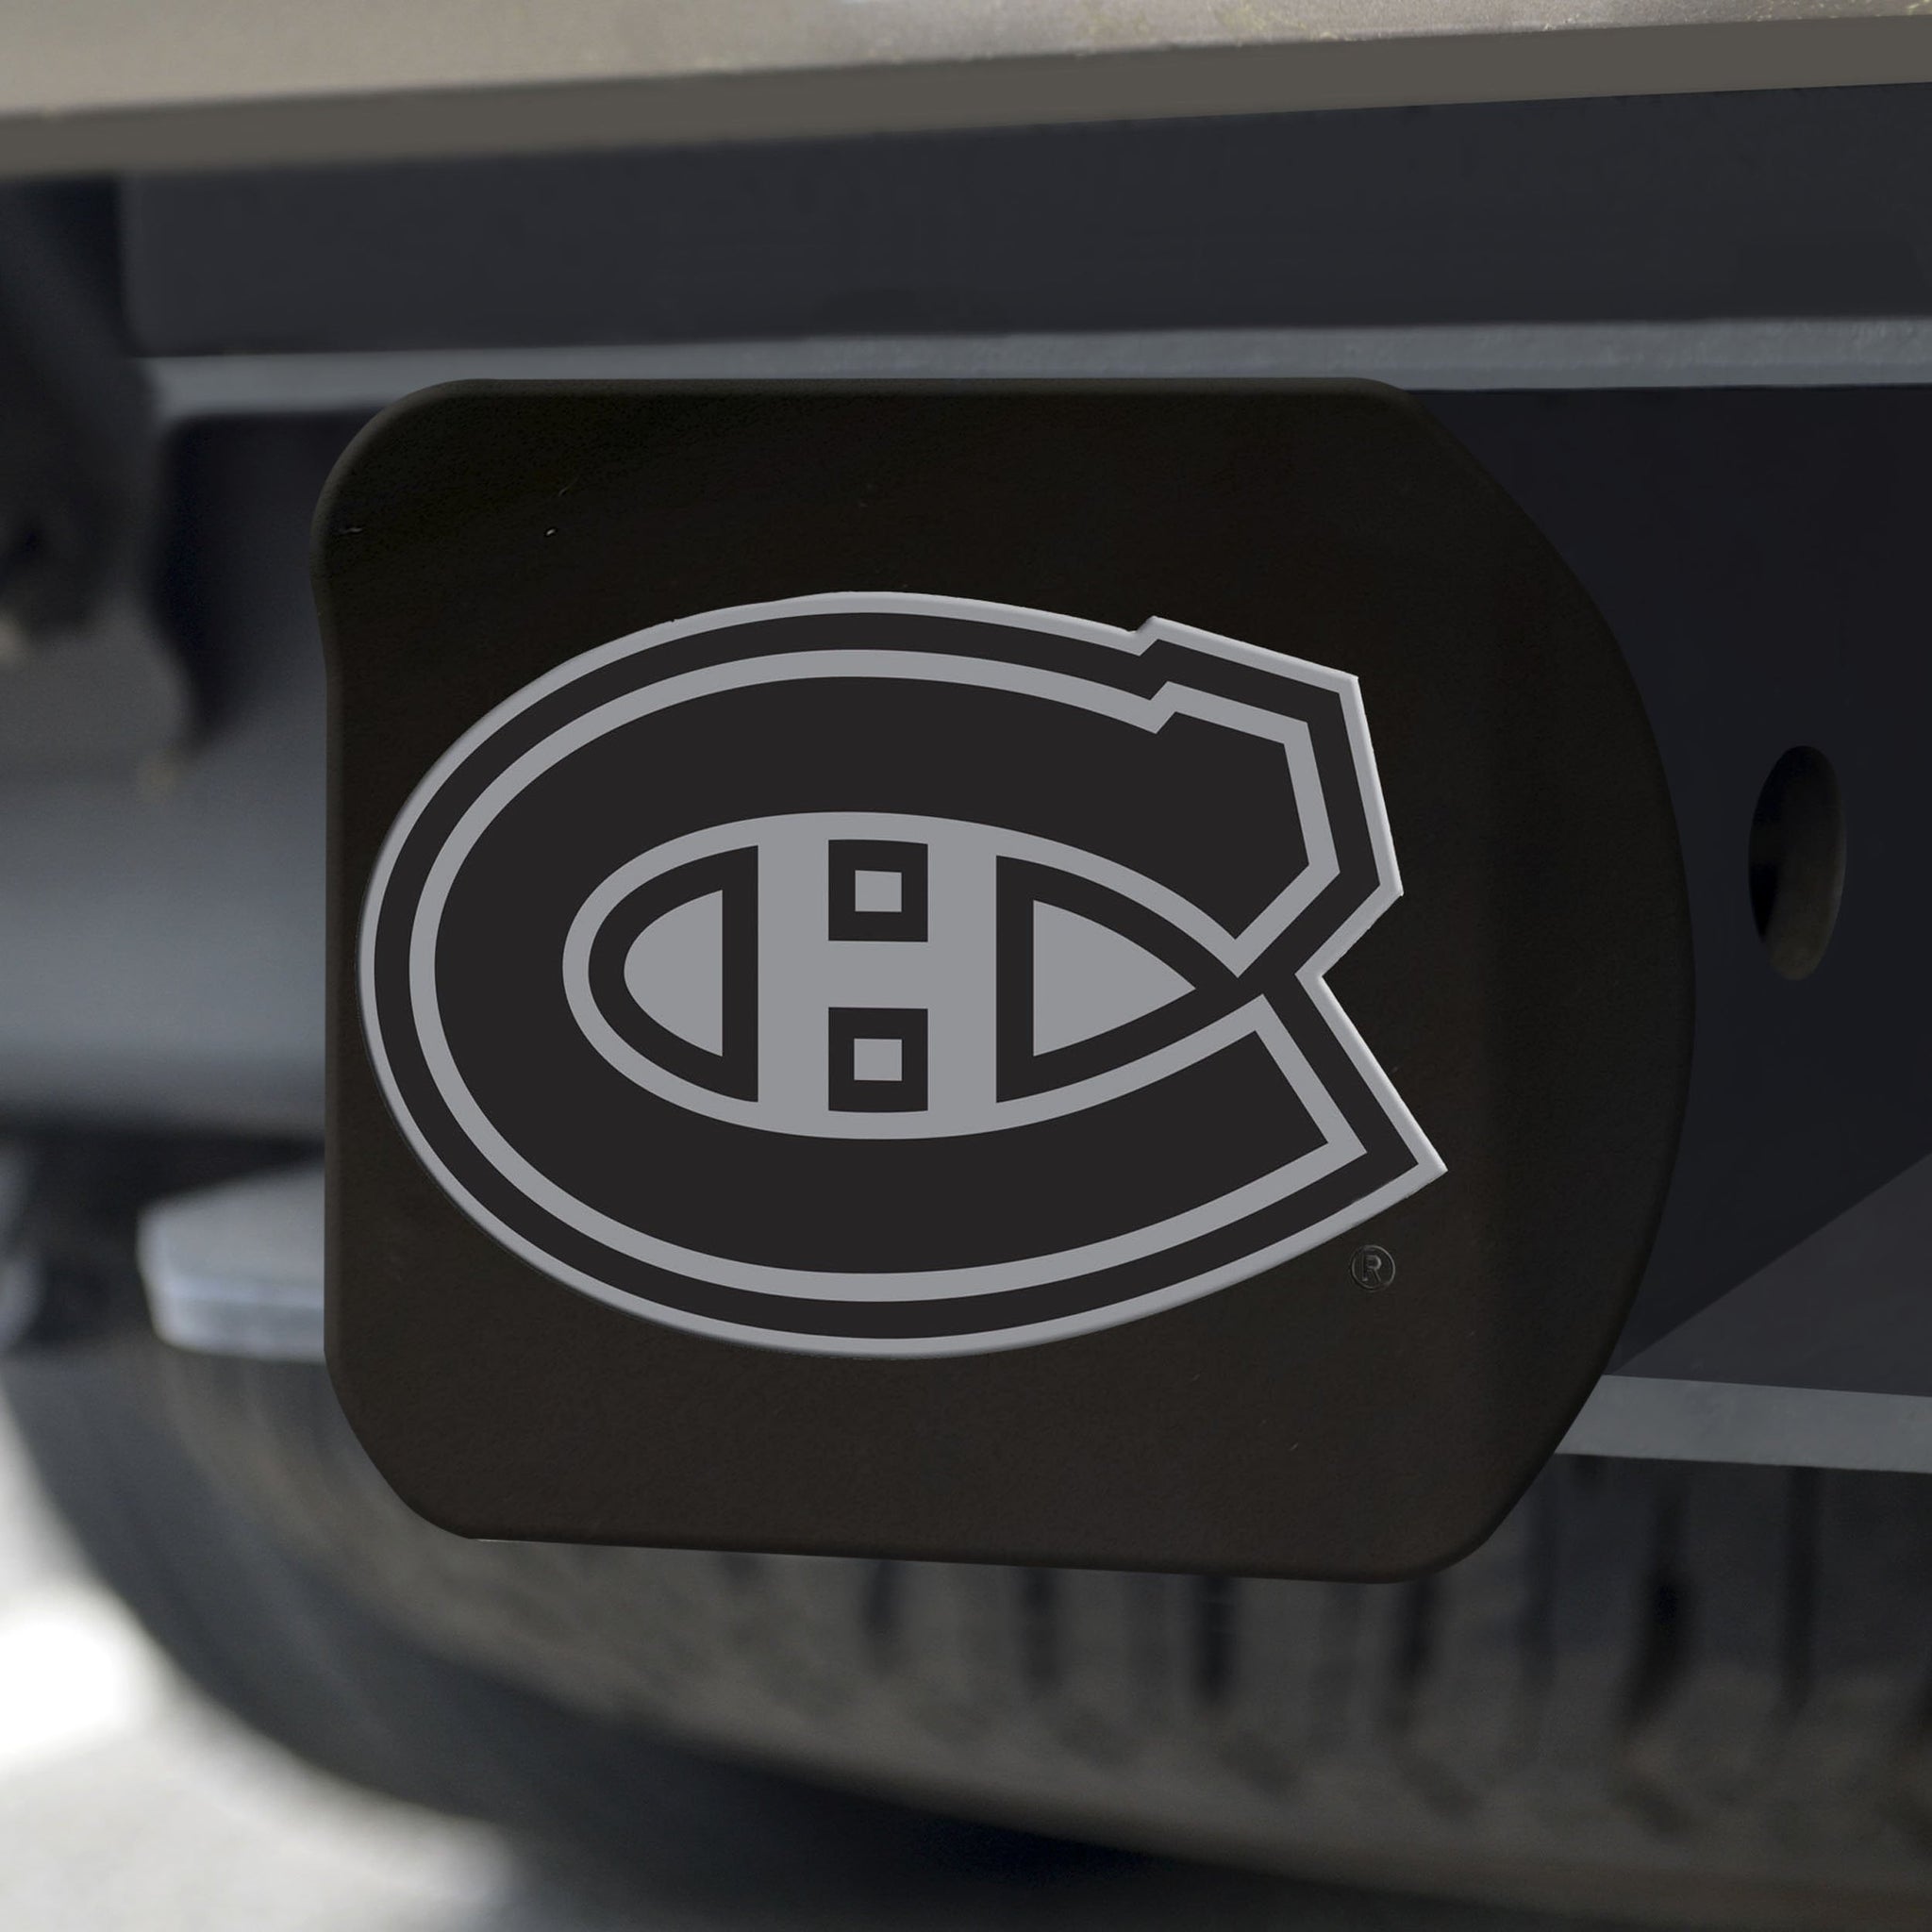 Montreal Canadiens Chrome Hitch Cover - Black 3.4